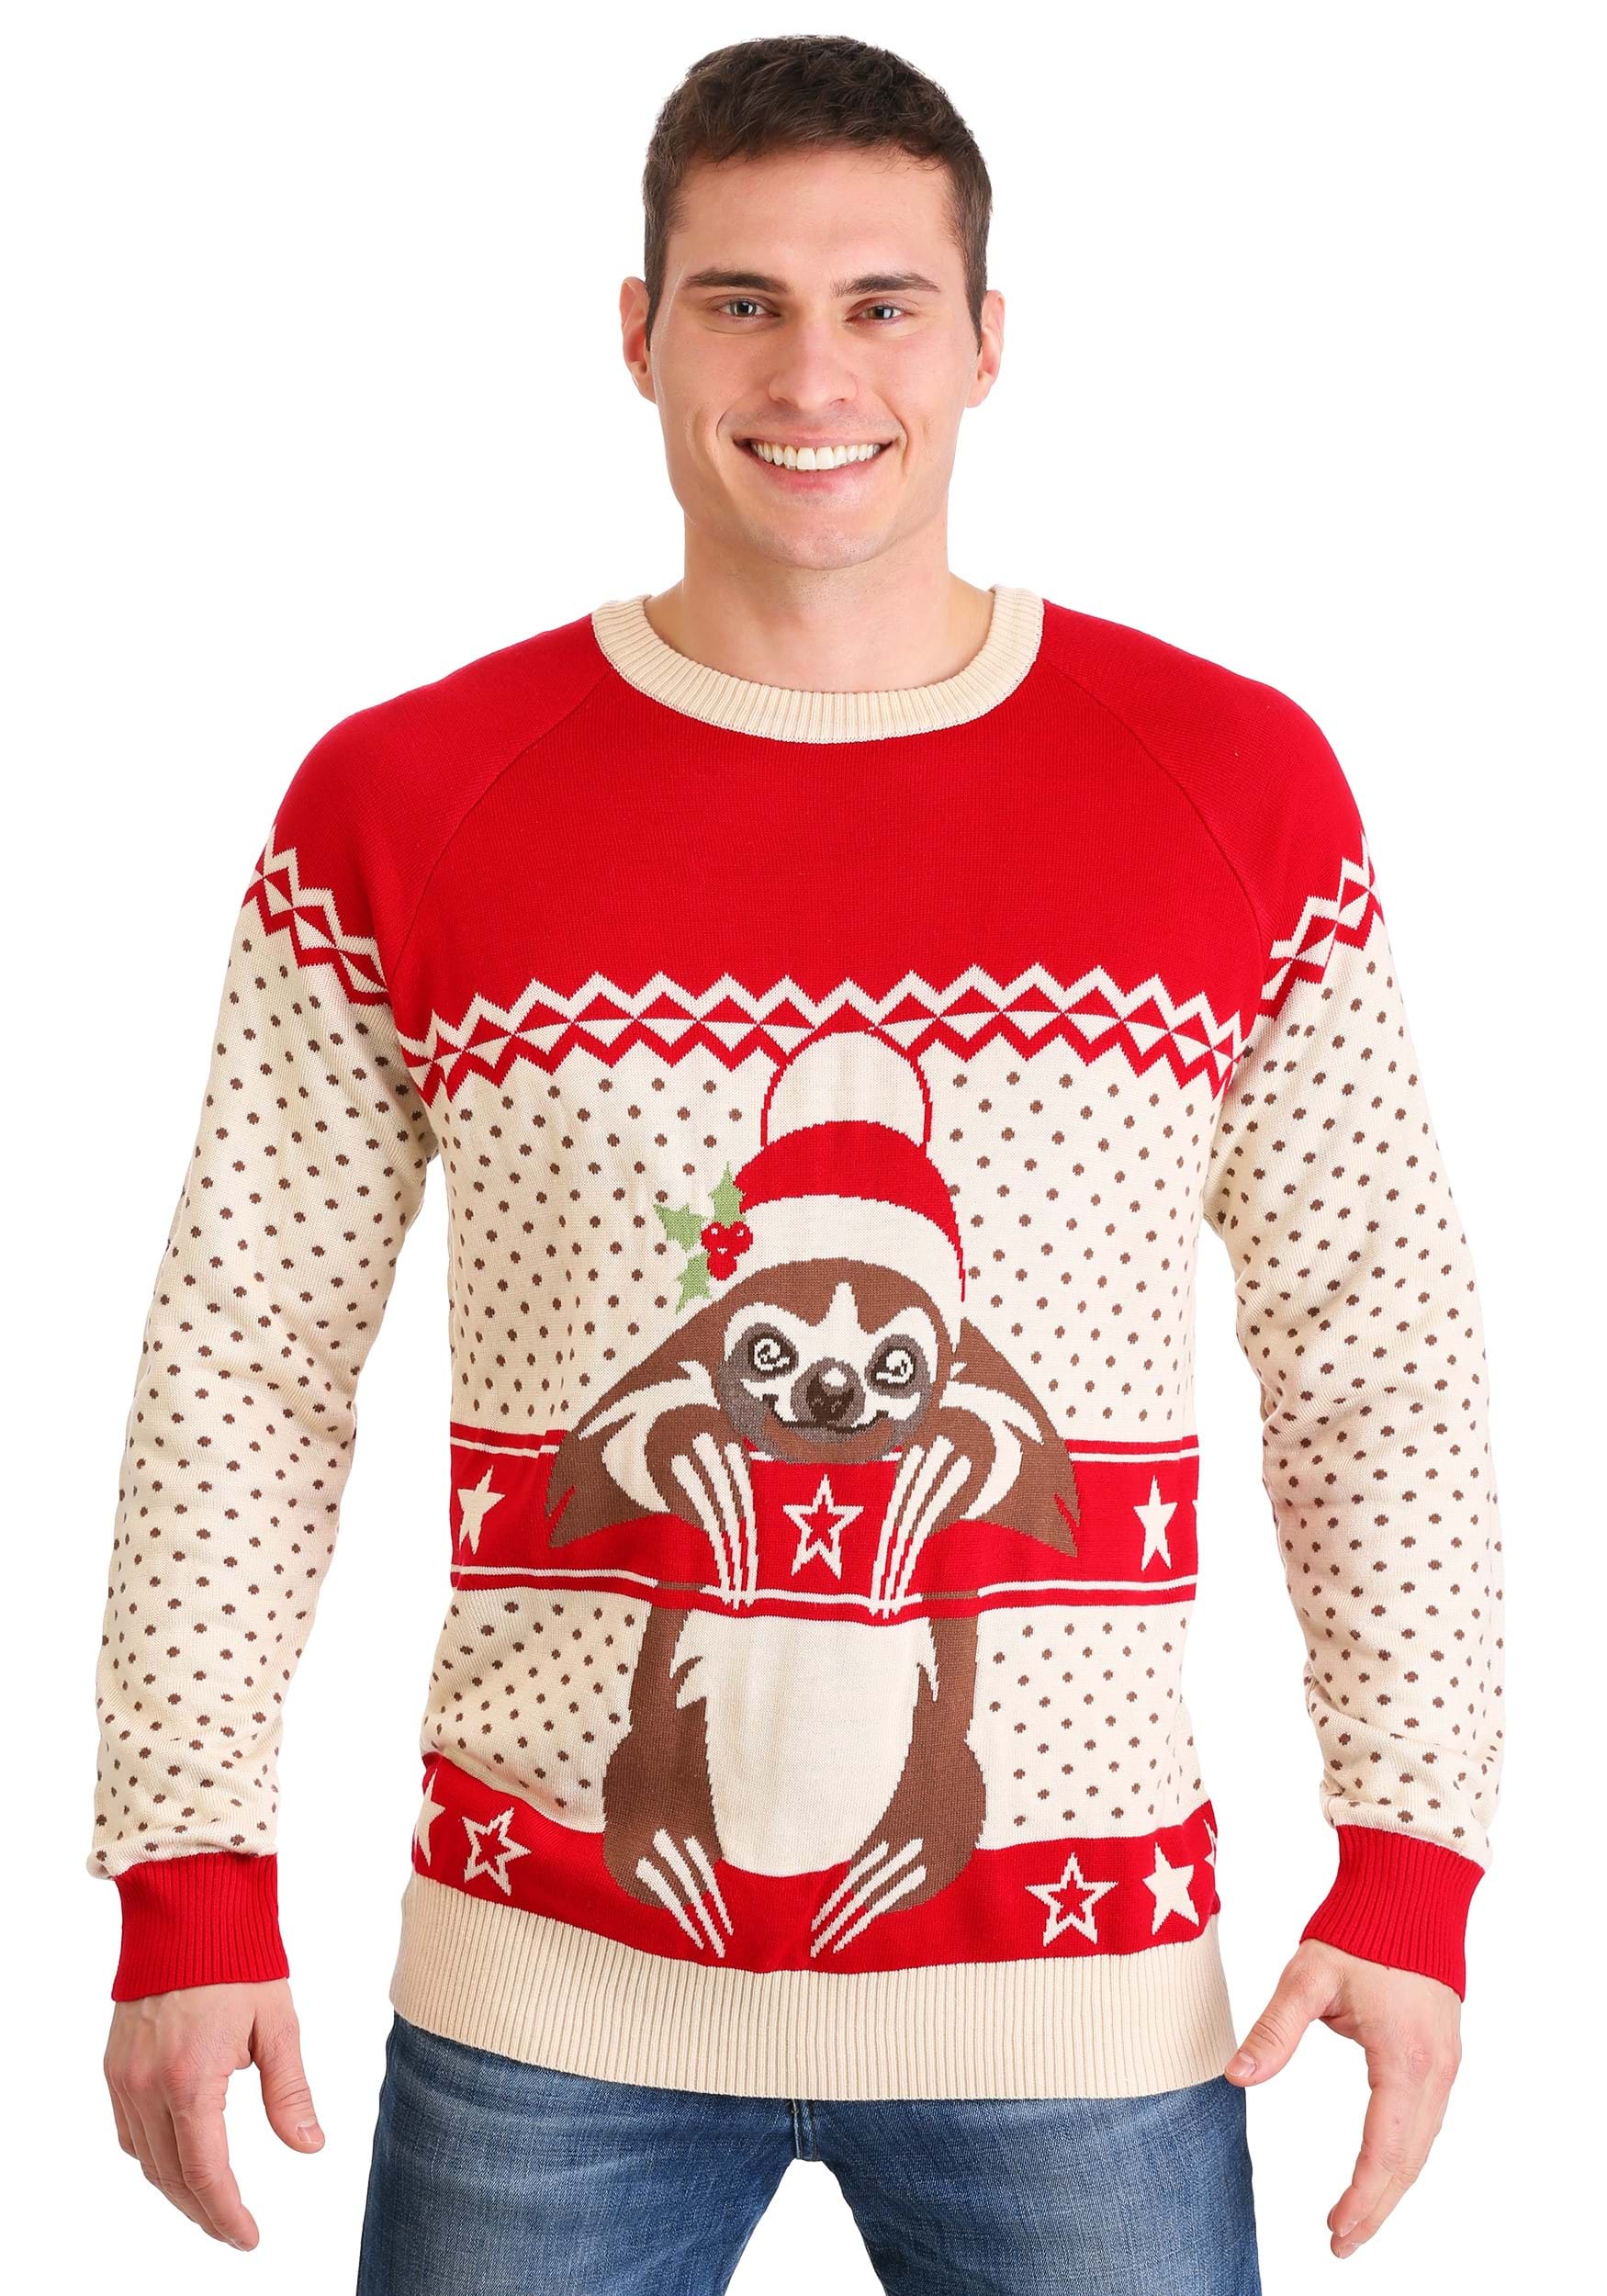 Sloth Ugly Christmas Sweater For Adults